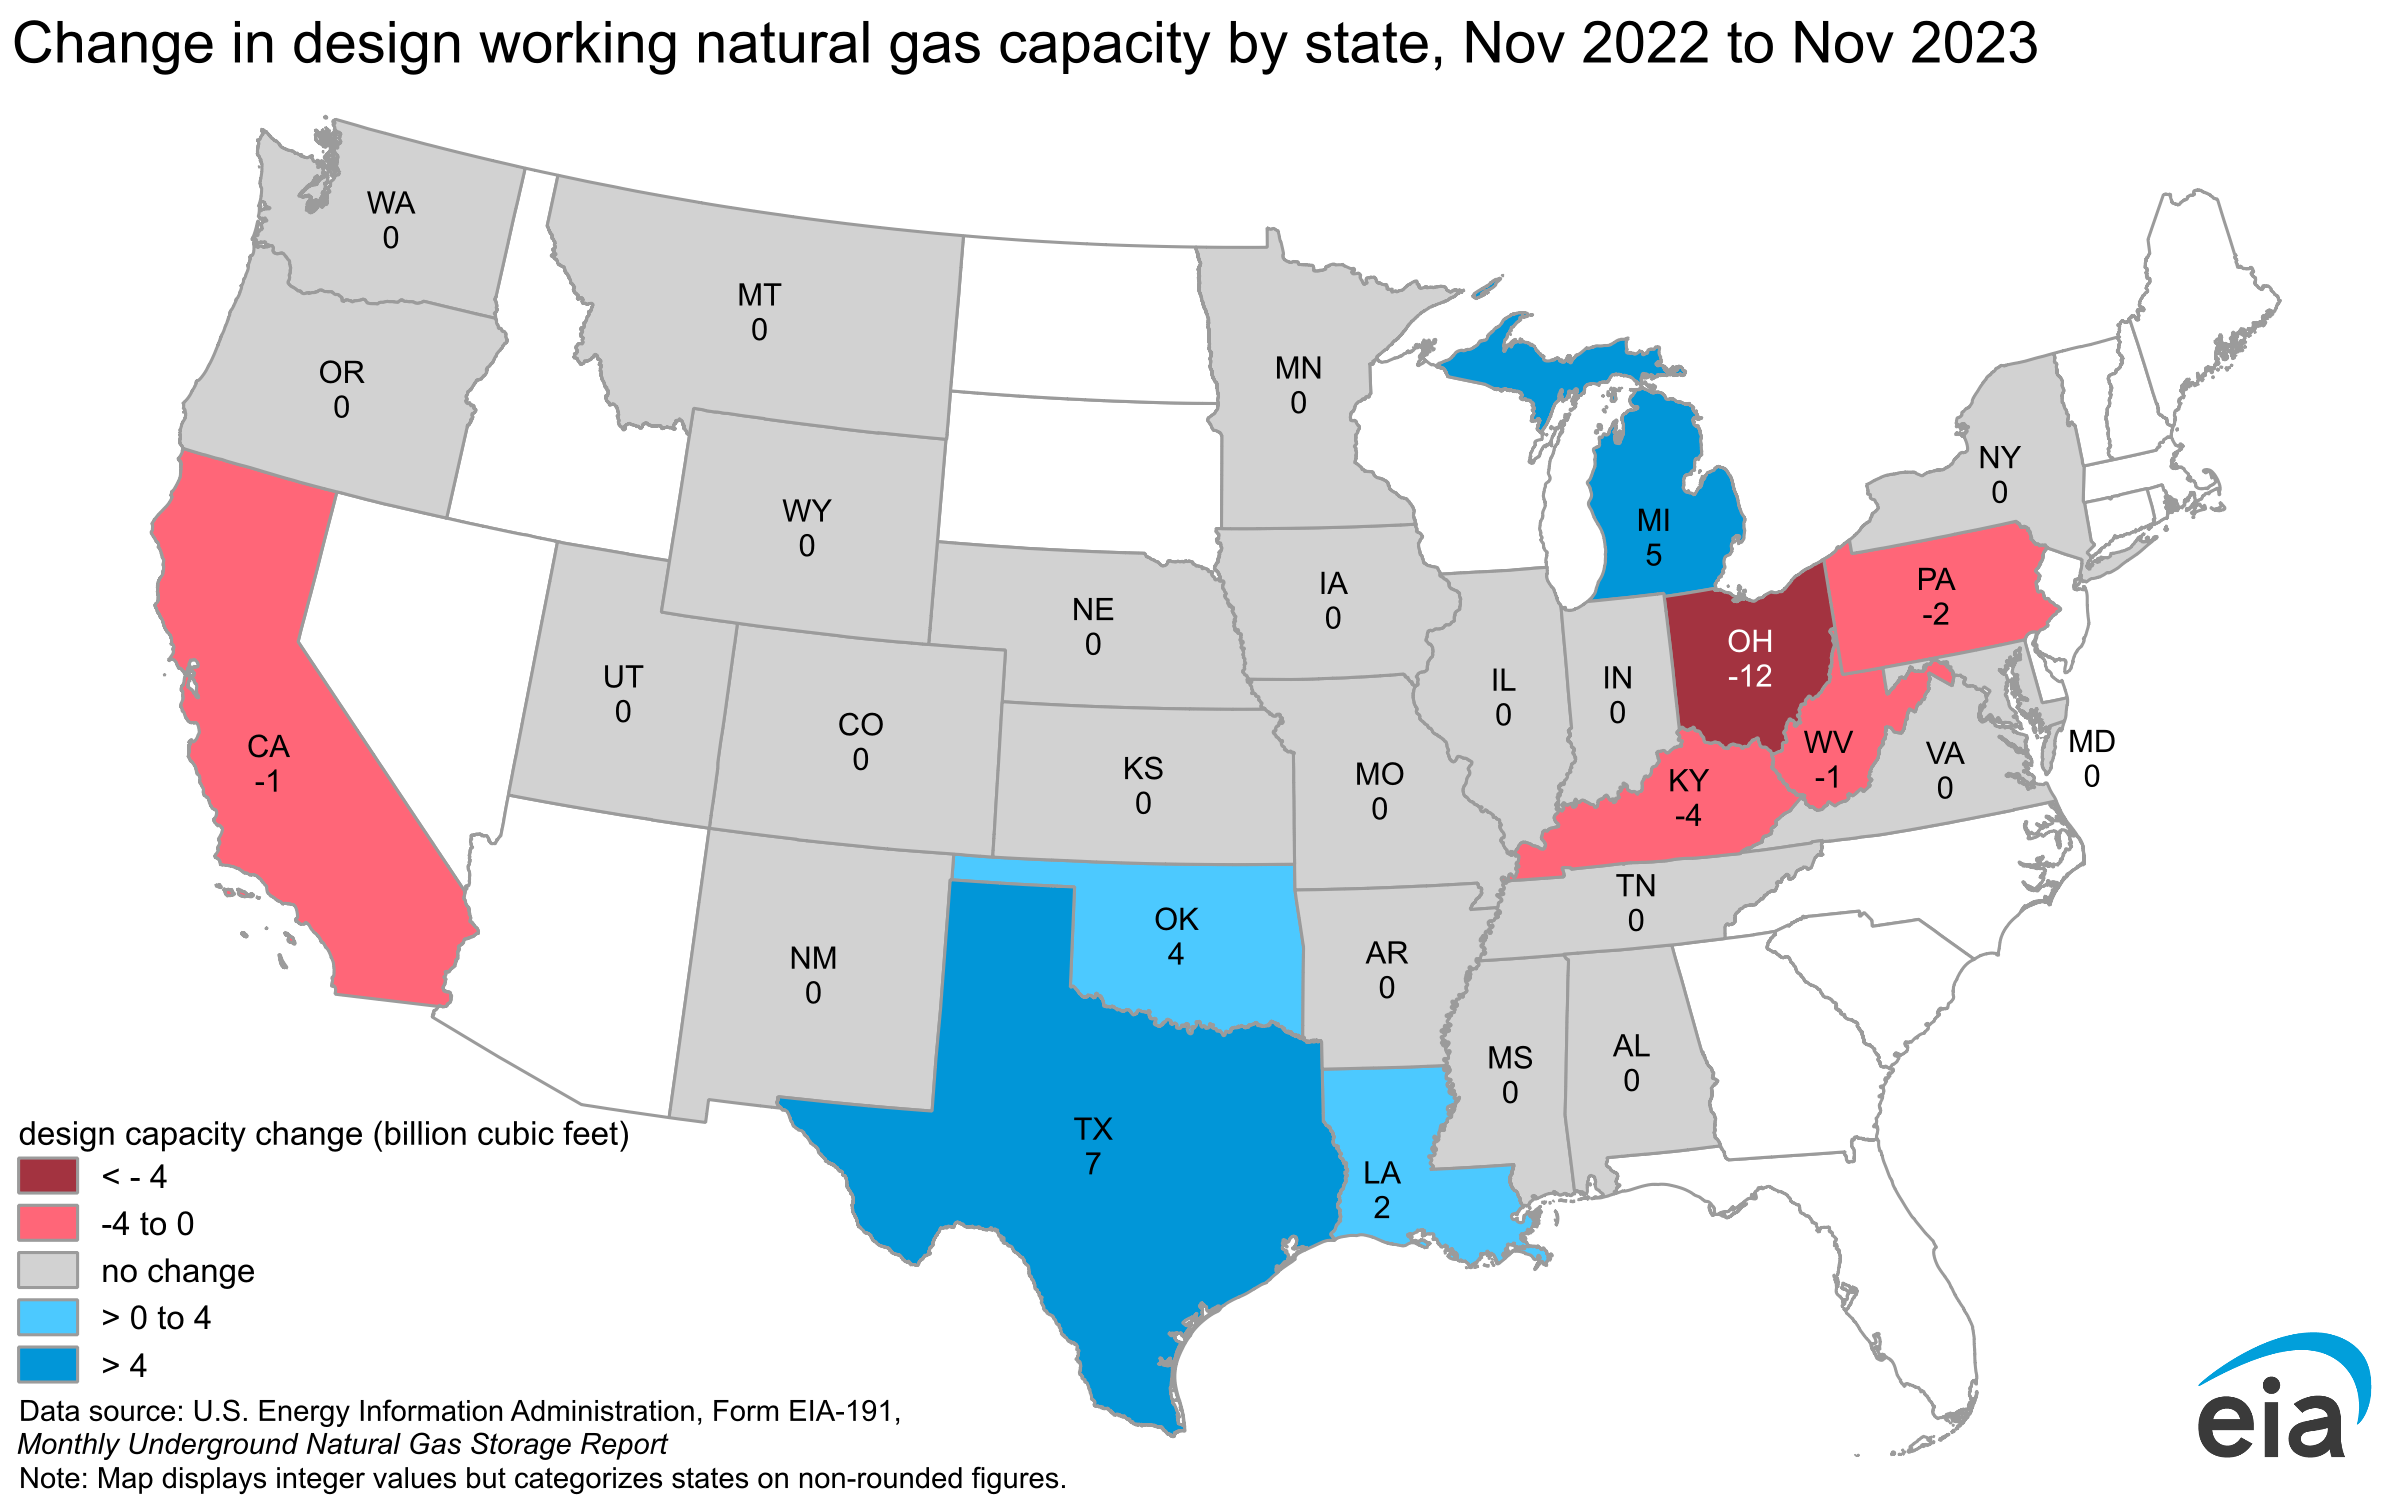 Change in design working natural gas capacity by state, Nov 2020 to Nov 2021